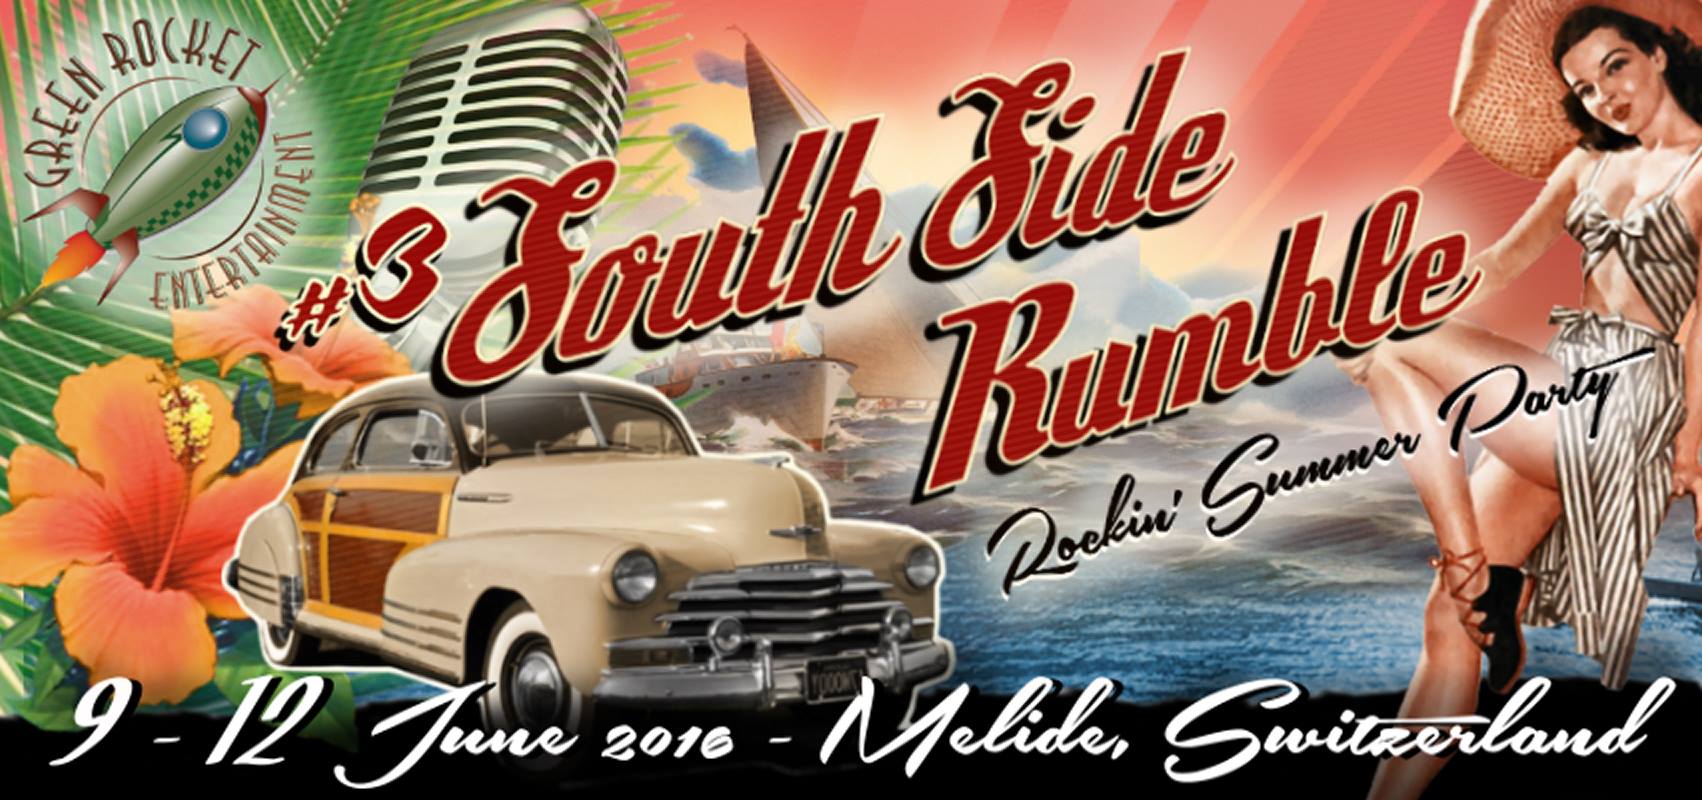 South side Rumble